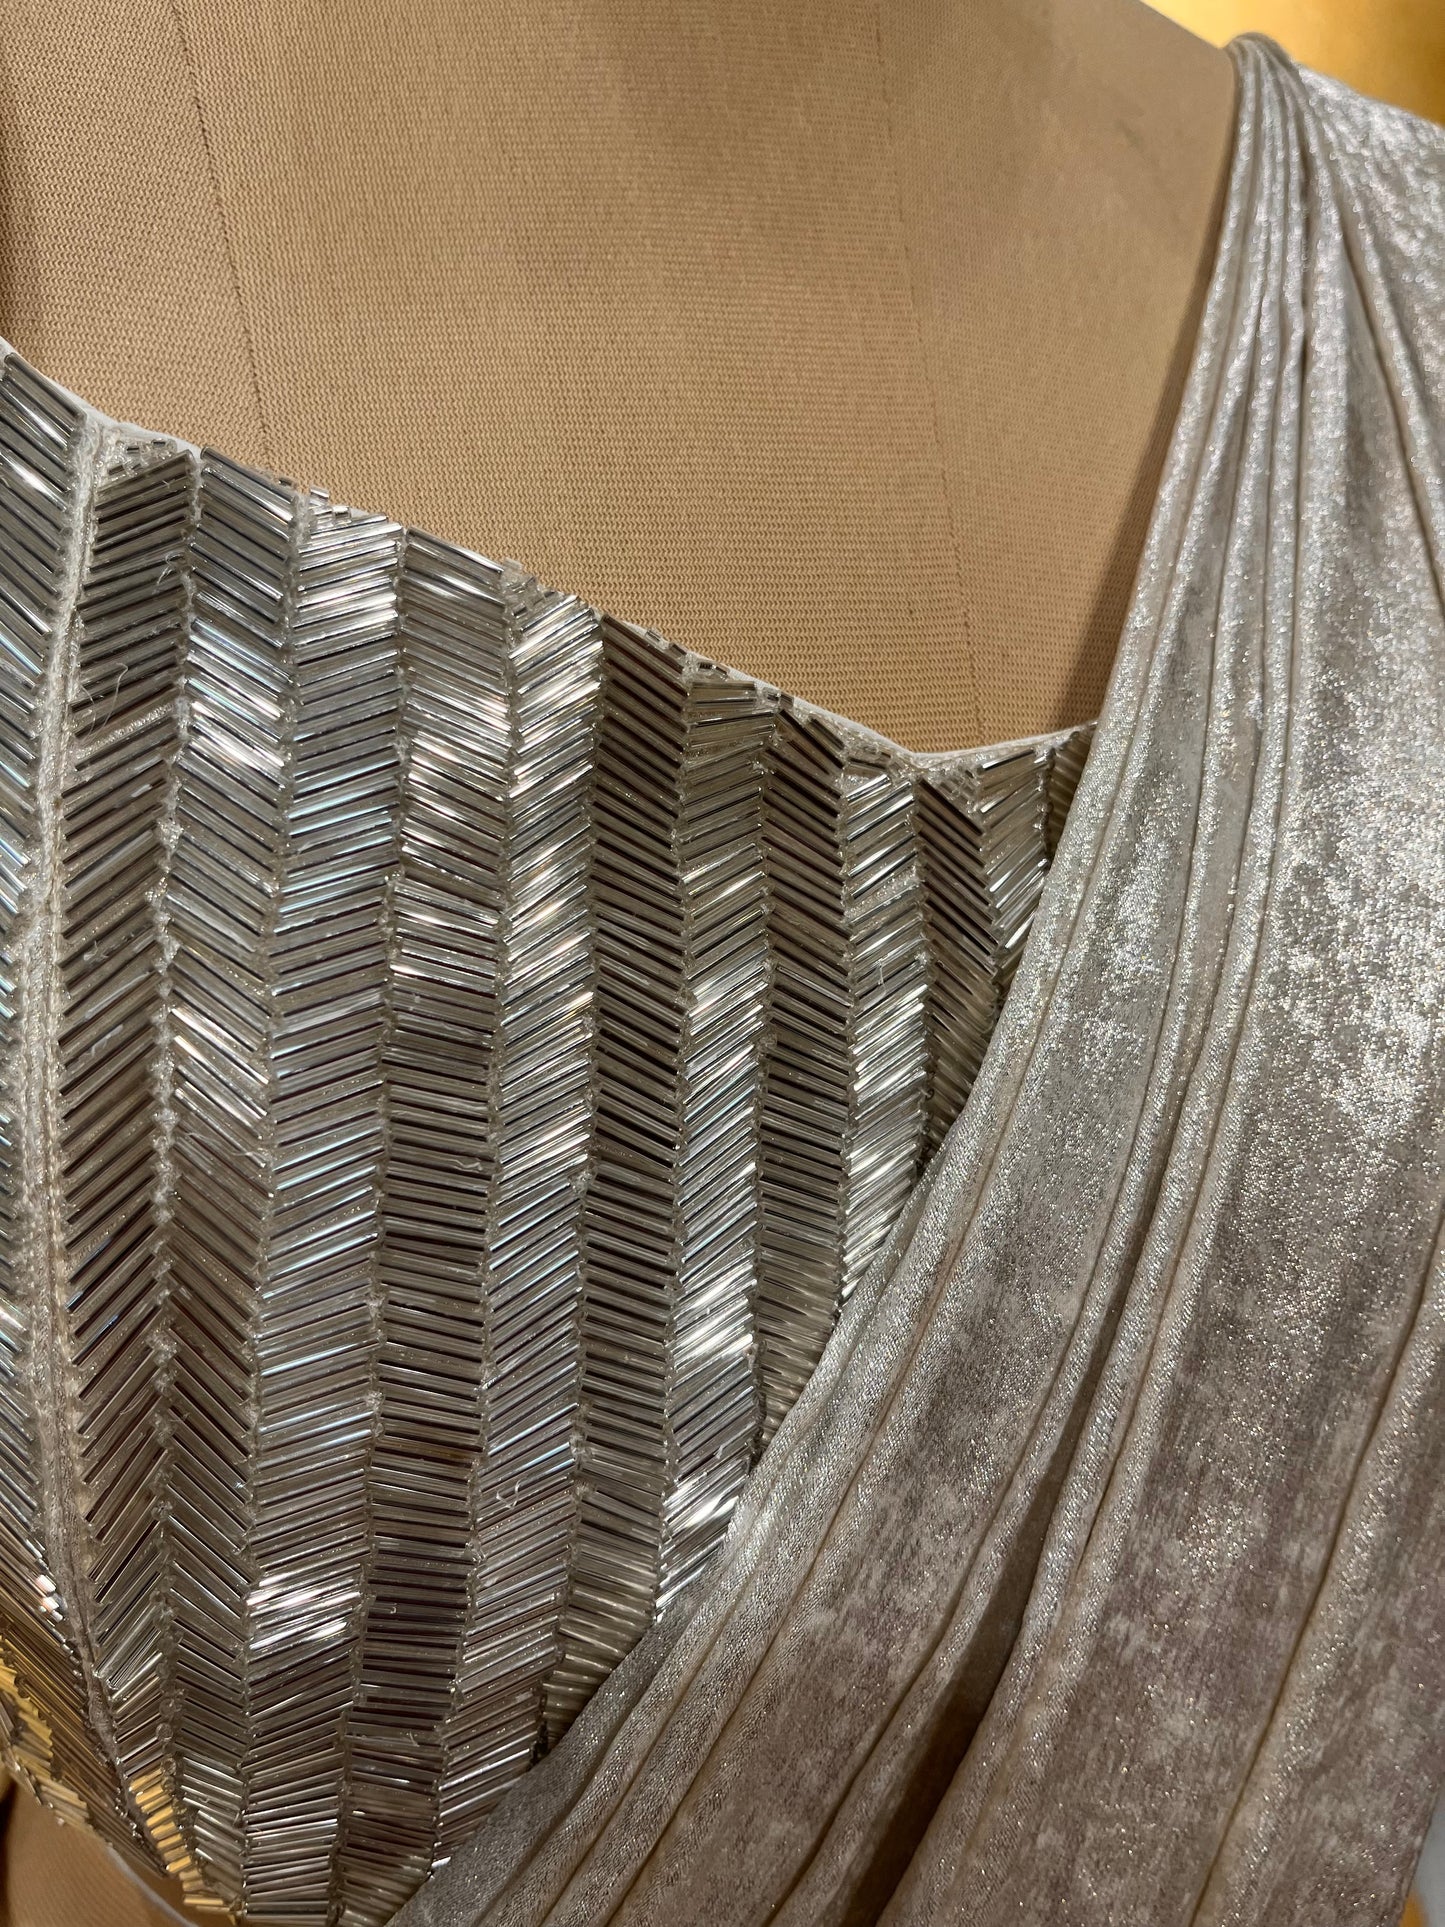 SILVER FOIL LYCRA READYMADE SAREE WITH DESIGNER CROP TOP BLOUSE EMBELLISHED WITH CUTDANA WORK